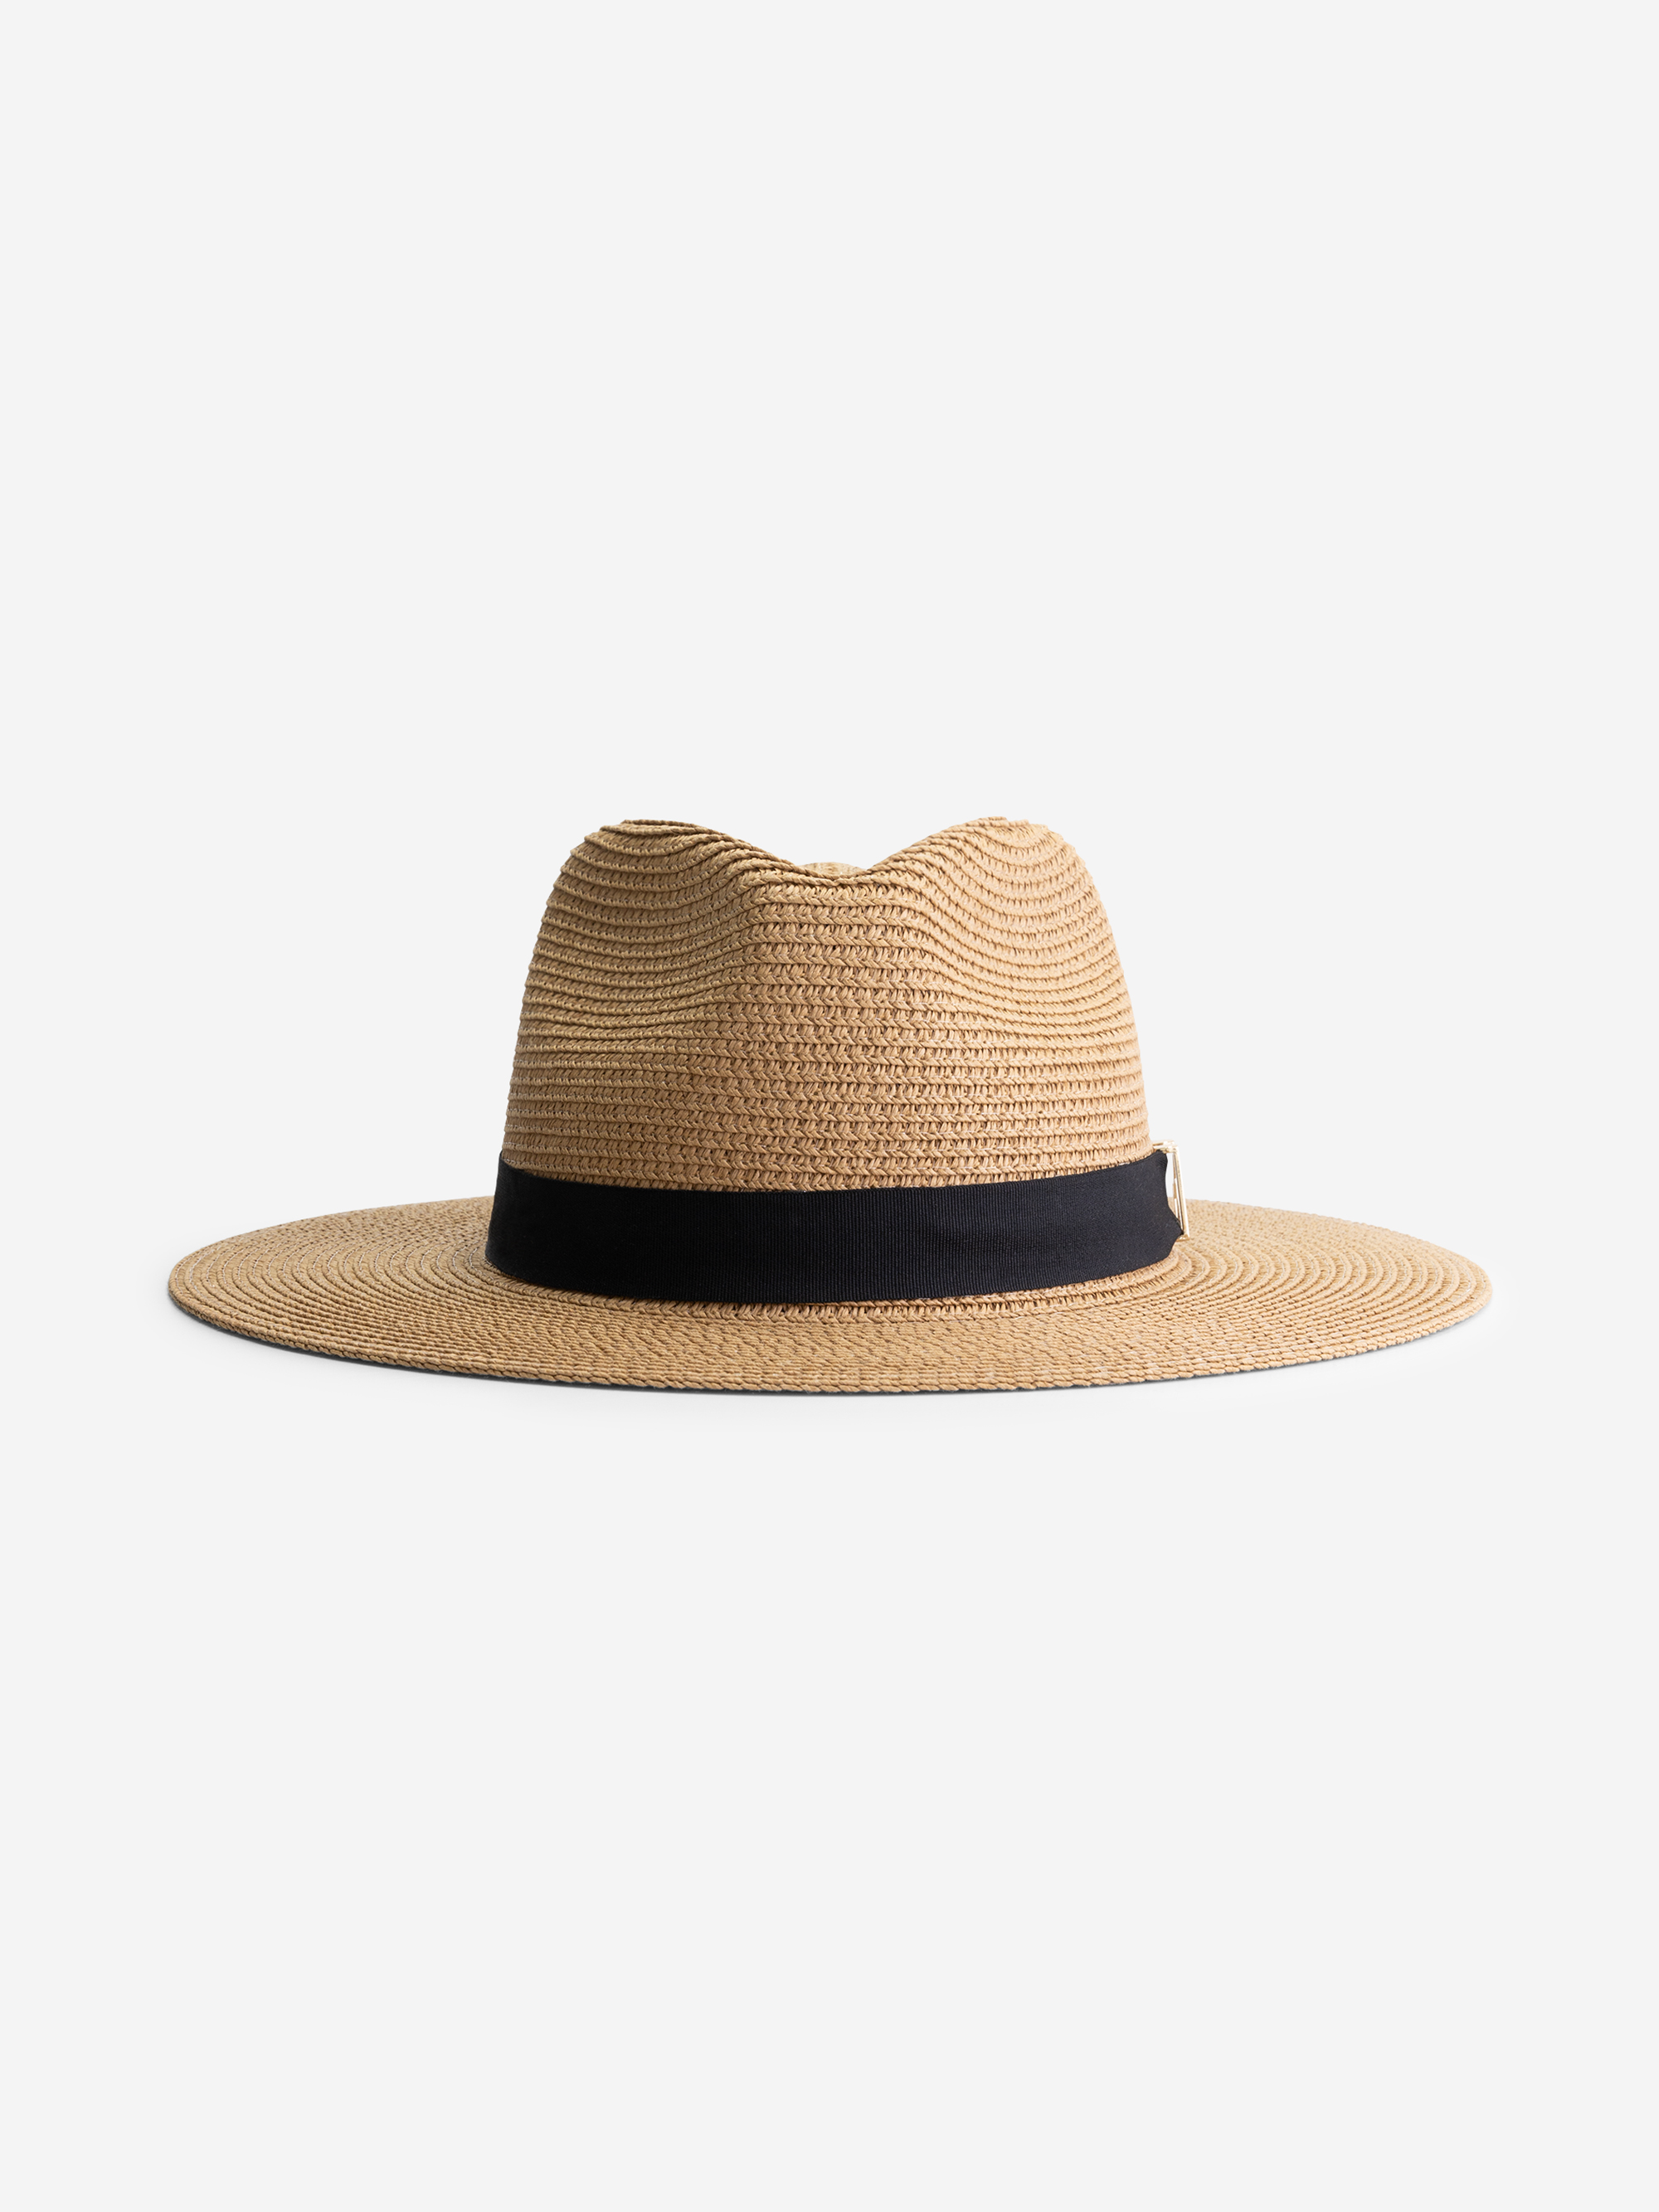 The perfect summer hat